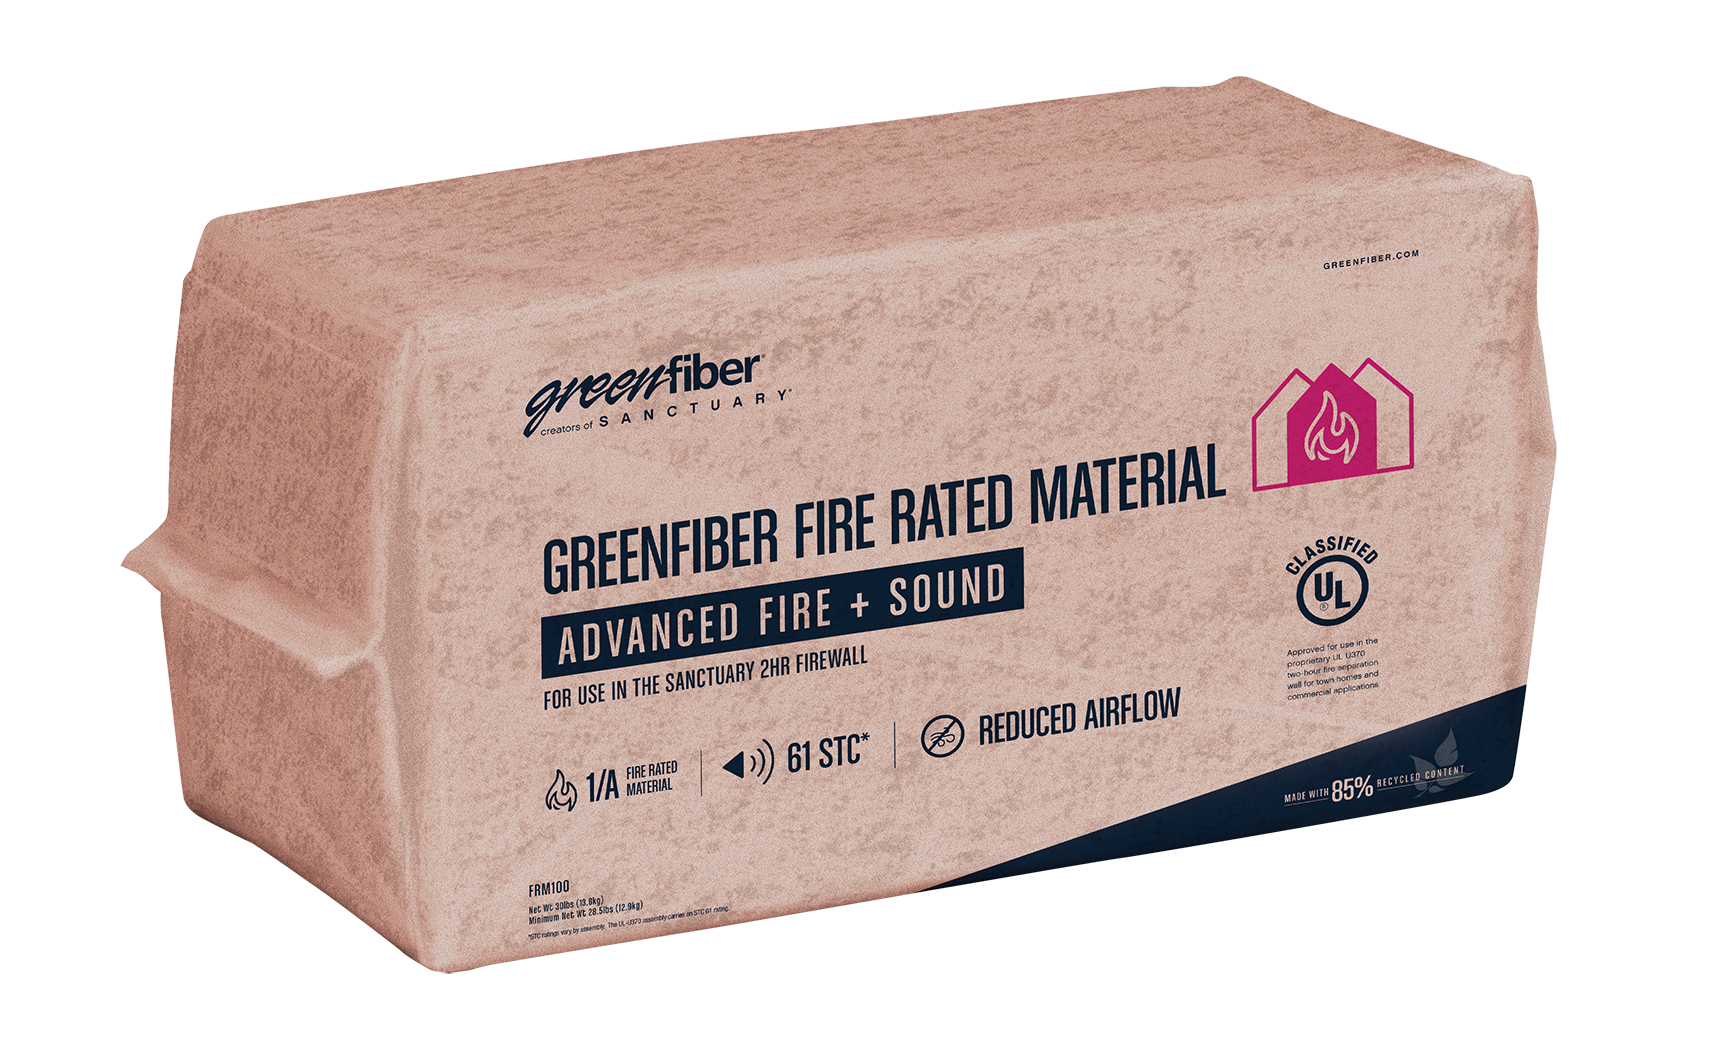 Isolated Greenfiber Fire Rated Material package.